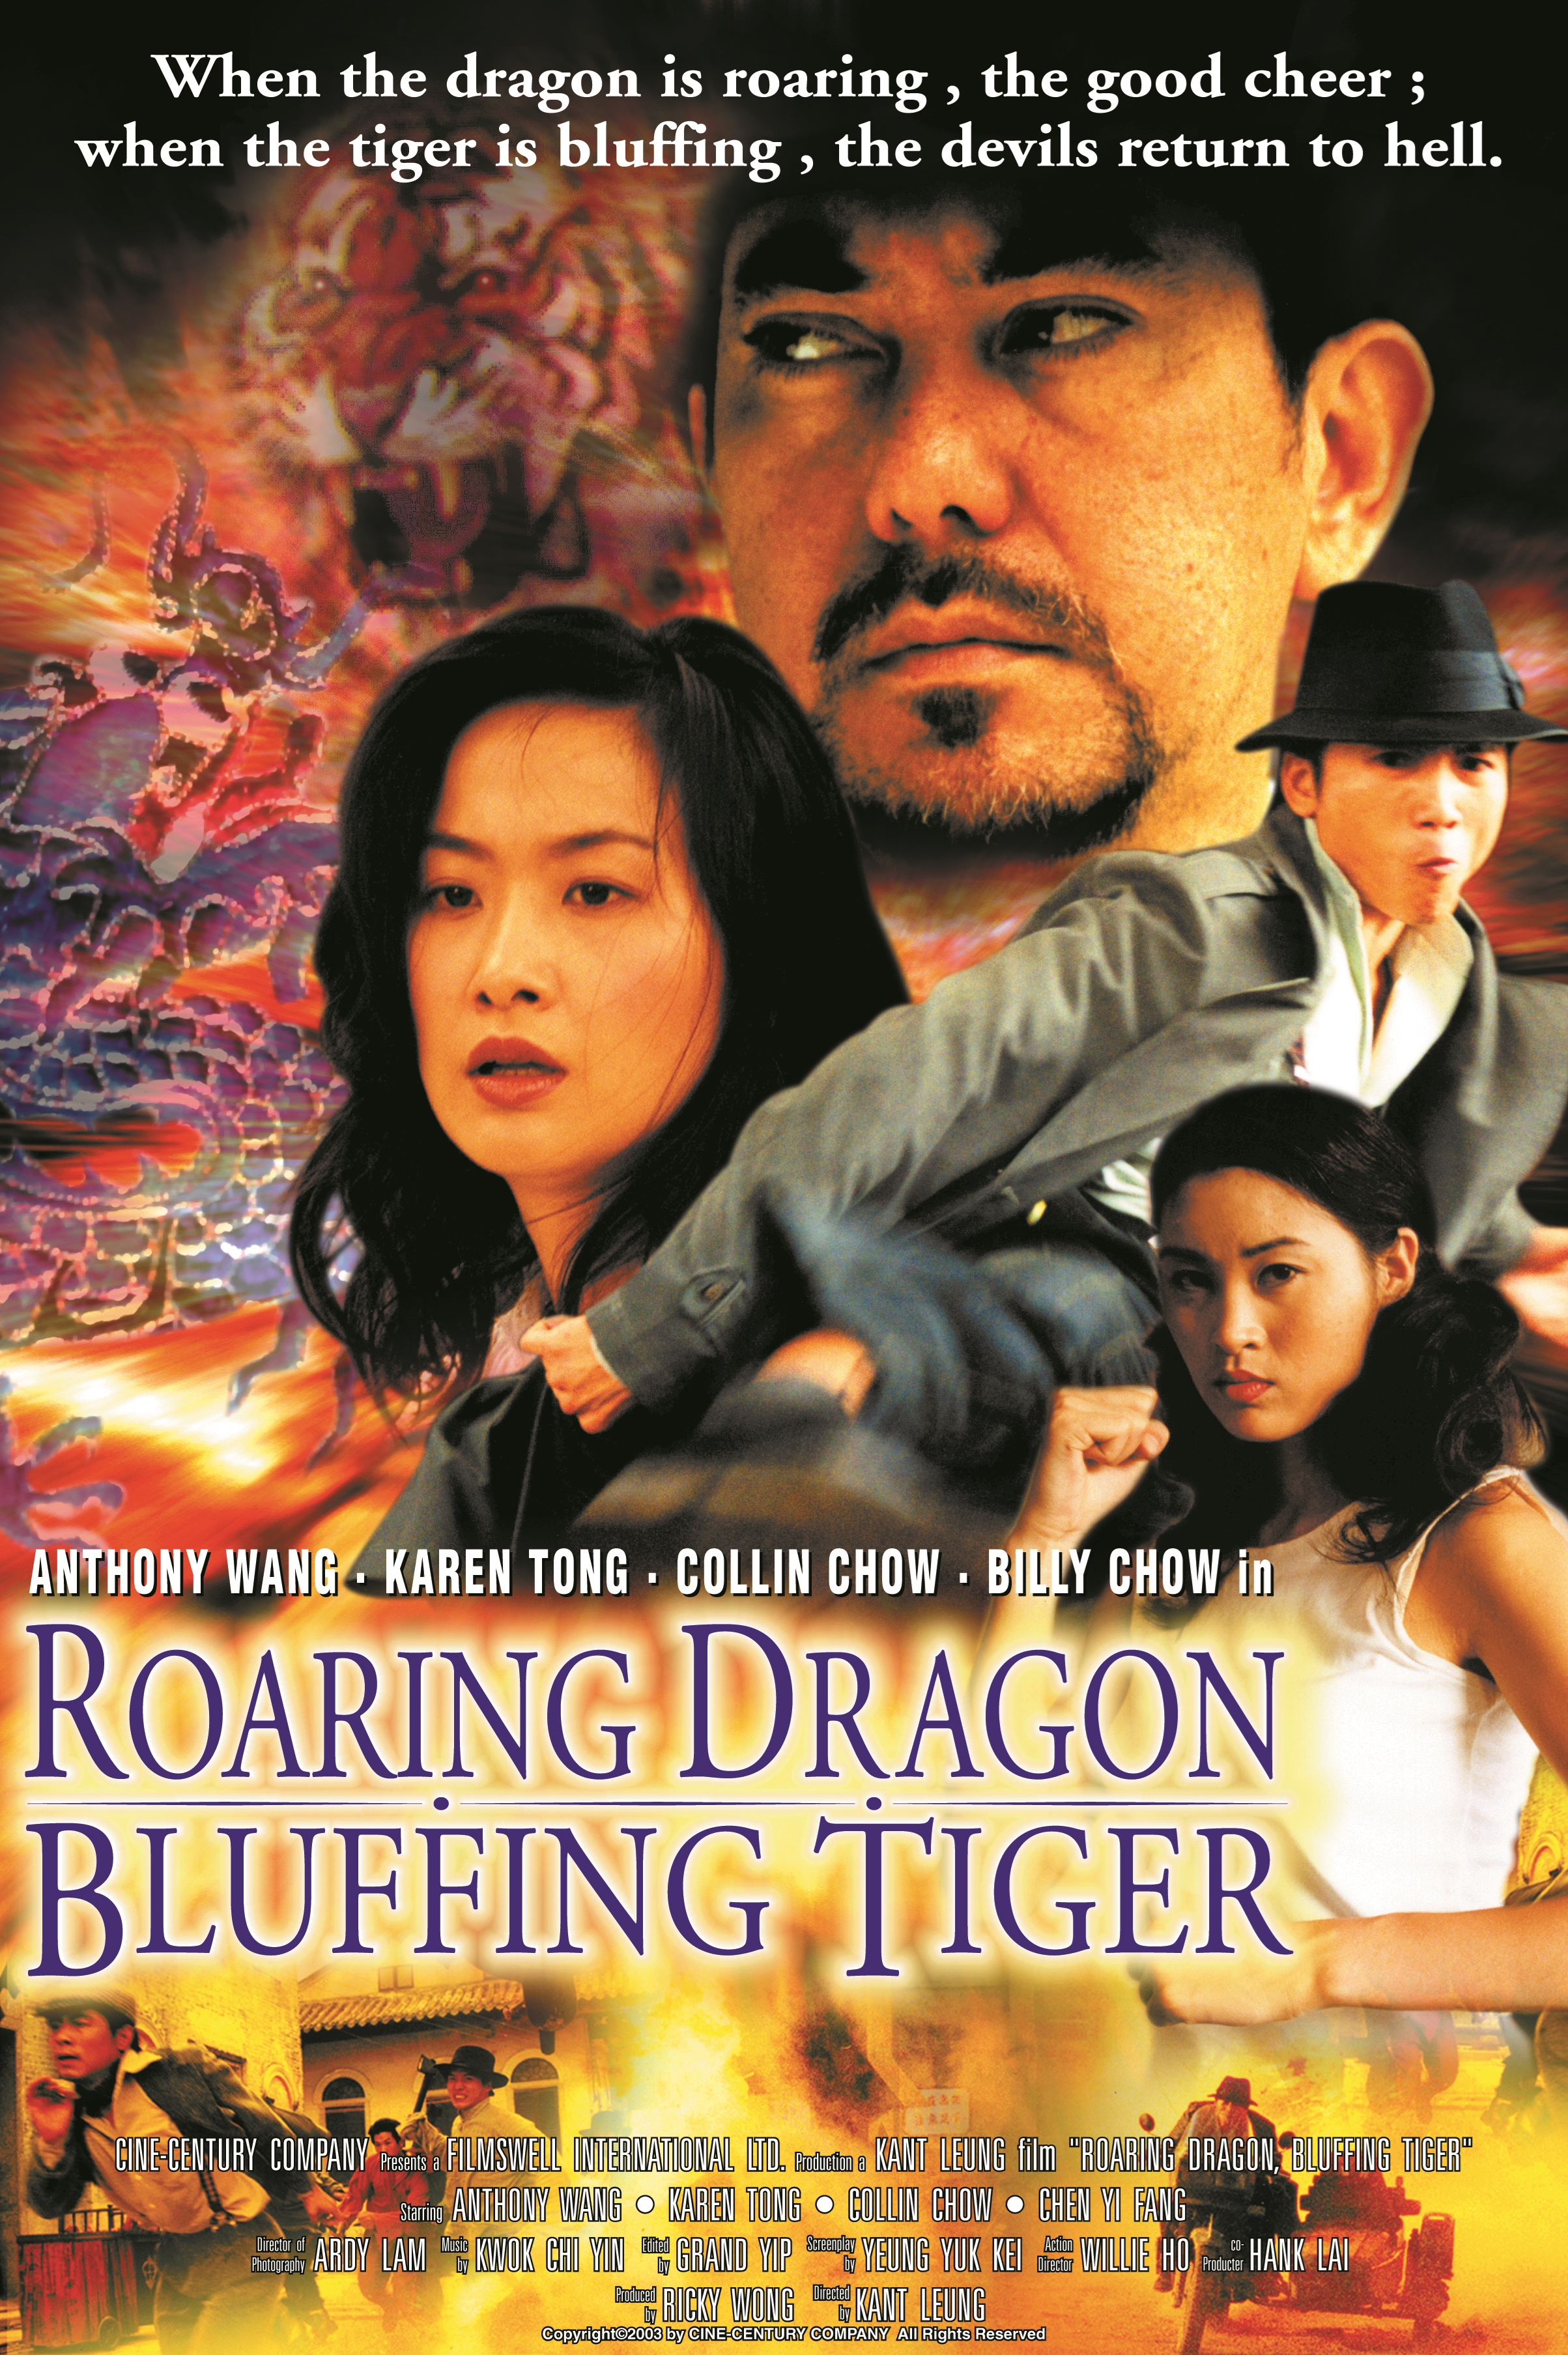 Roaring Dragon Bluffing Tiger - Live action web series